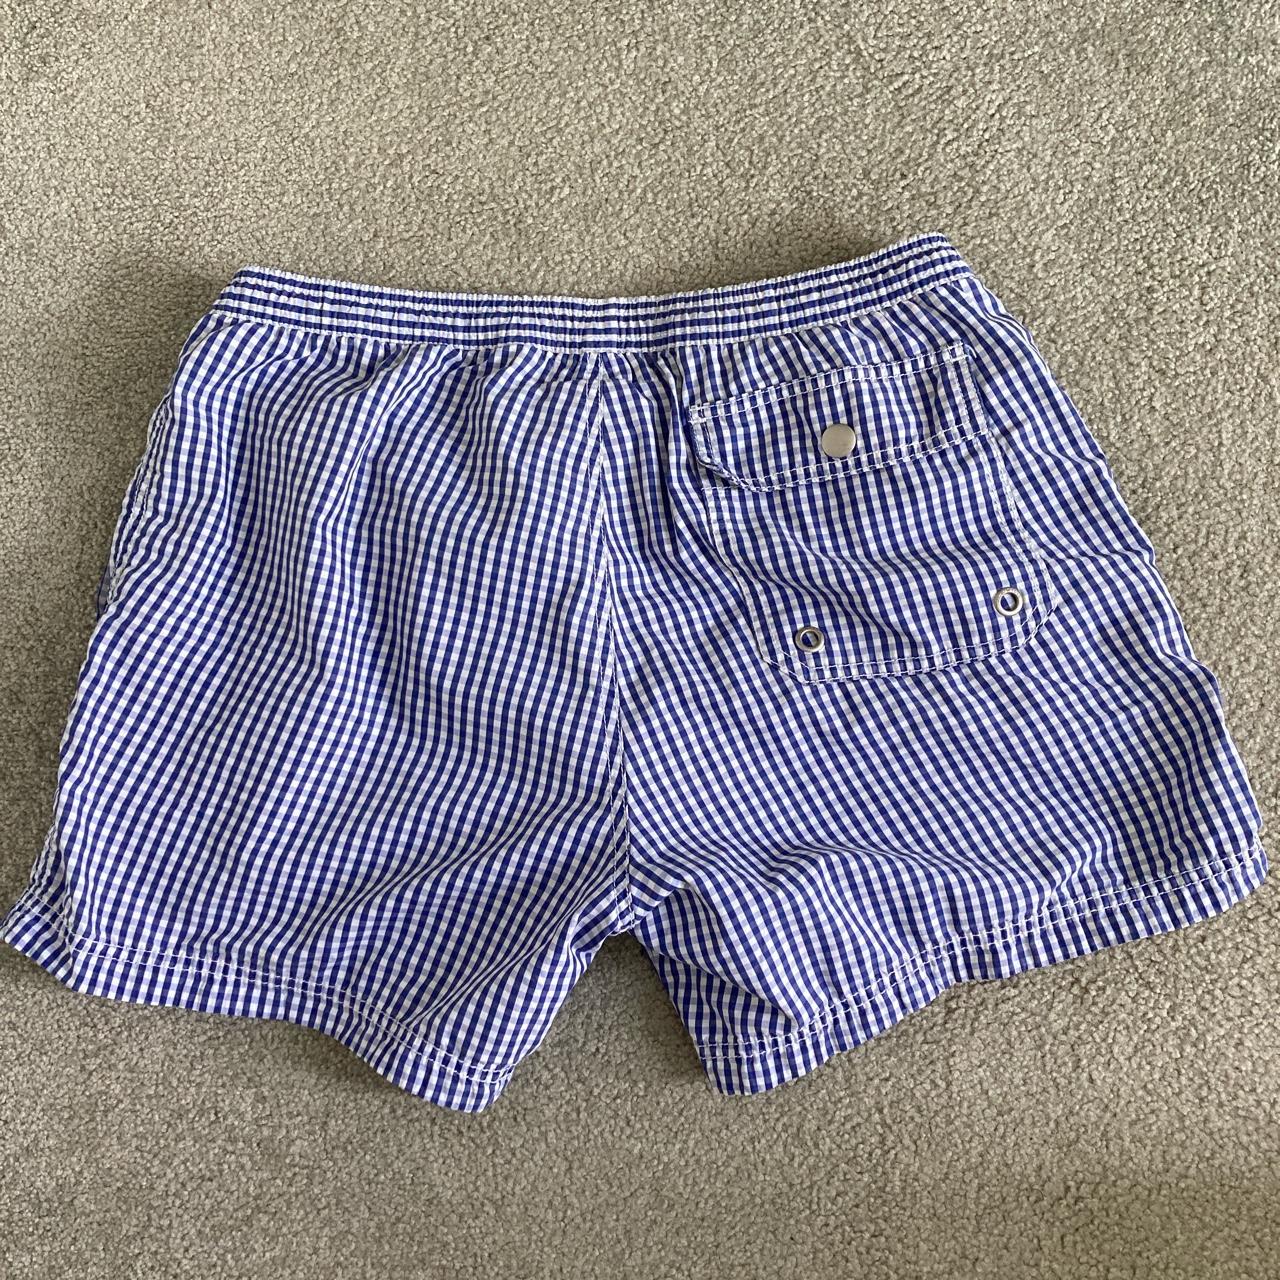 Blue and white checkered Jack Wills swimming shorts.... - Depop